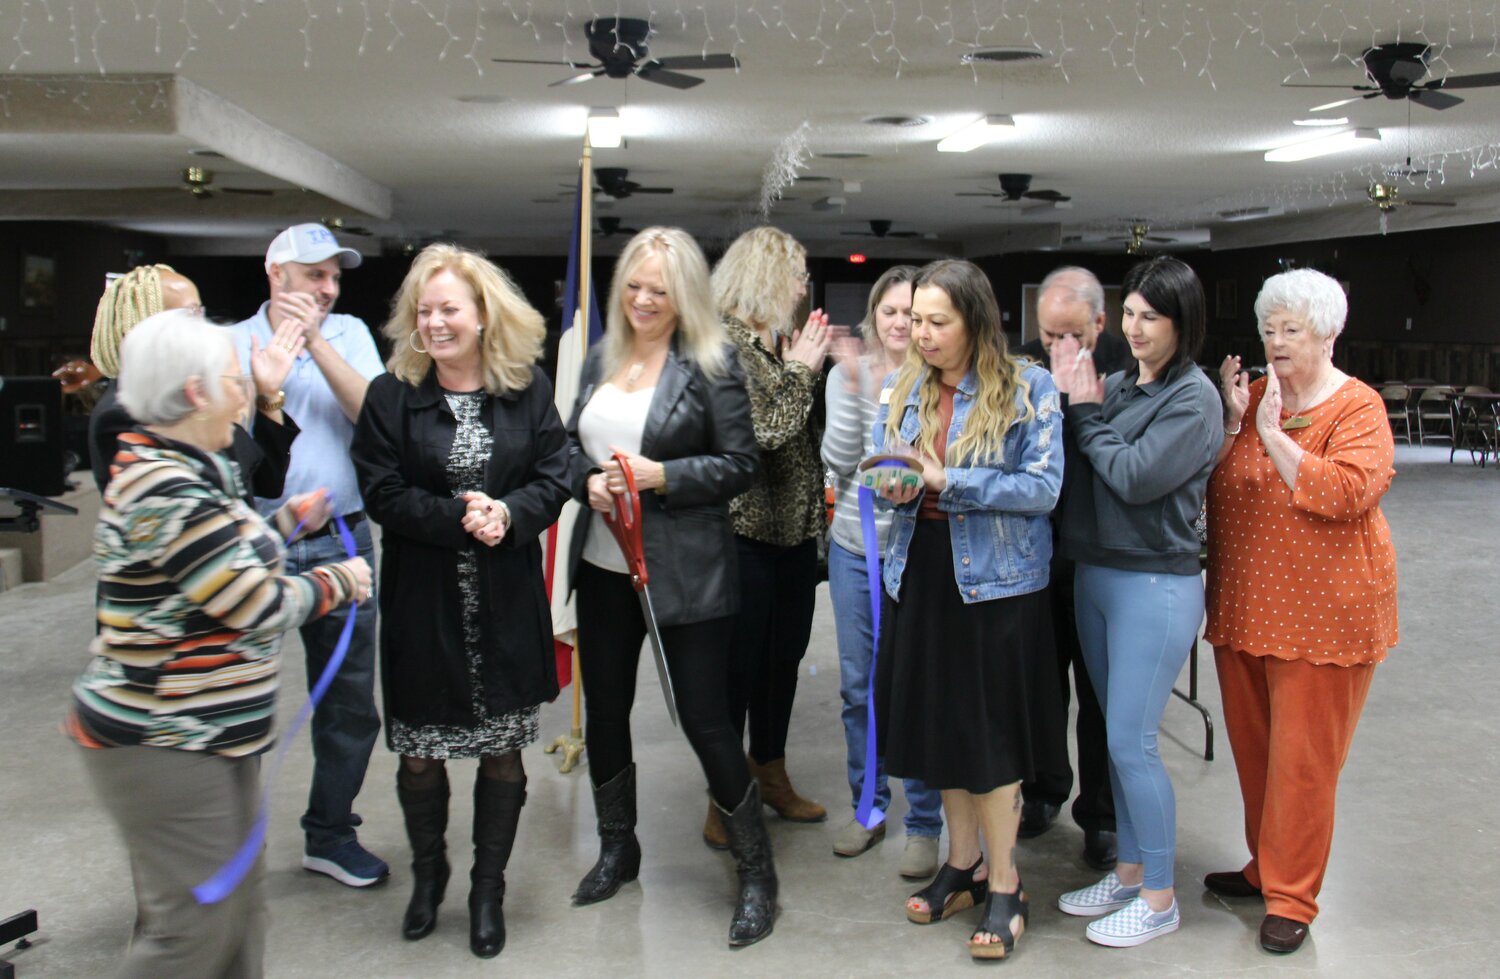 Springtown Area Chamber of Commerce ambassadors clap for Jane Faith, realtor at Coldwell Banker Apex Realtors, and Jill Sebik, senior loan officer at Platinum Eagle Mortgage, after honoring them with a ribbon cutting.